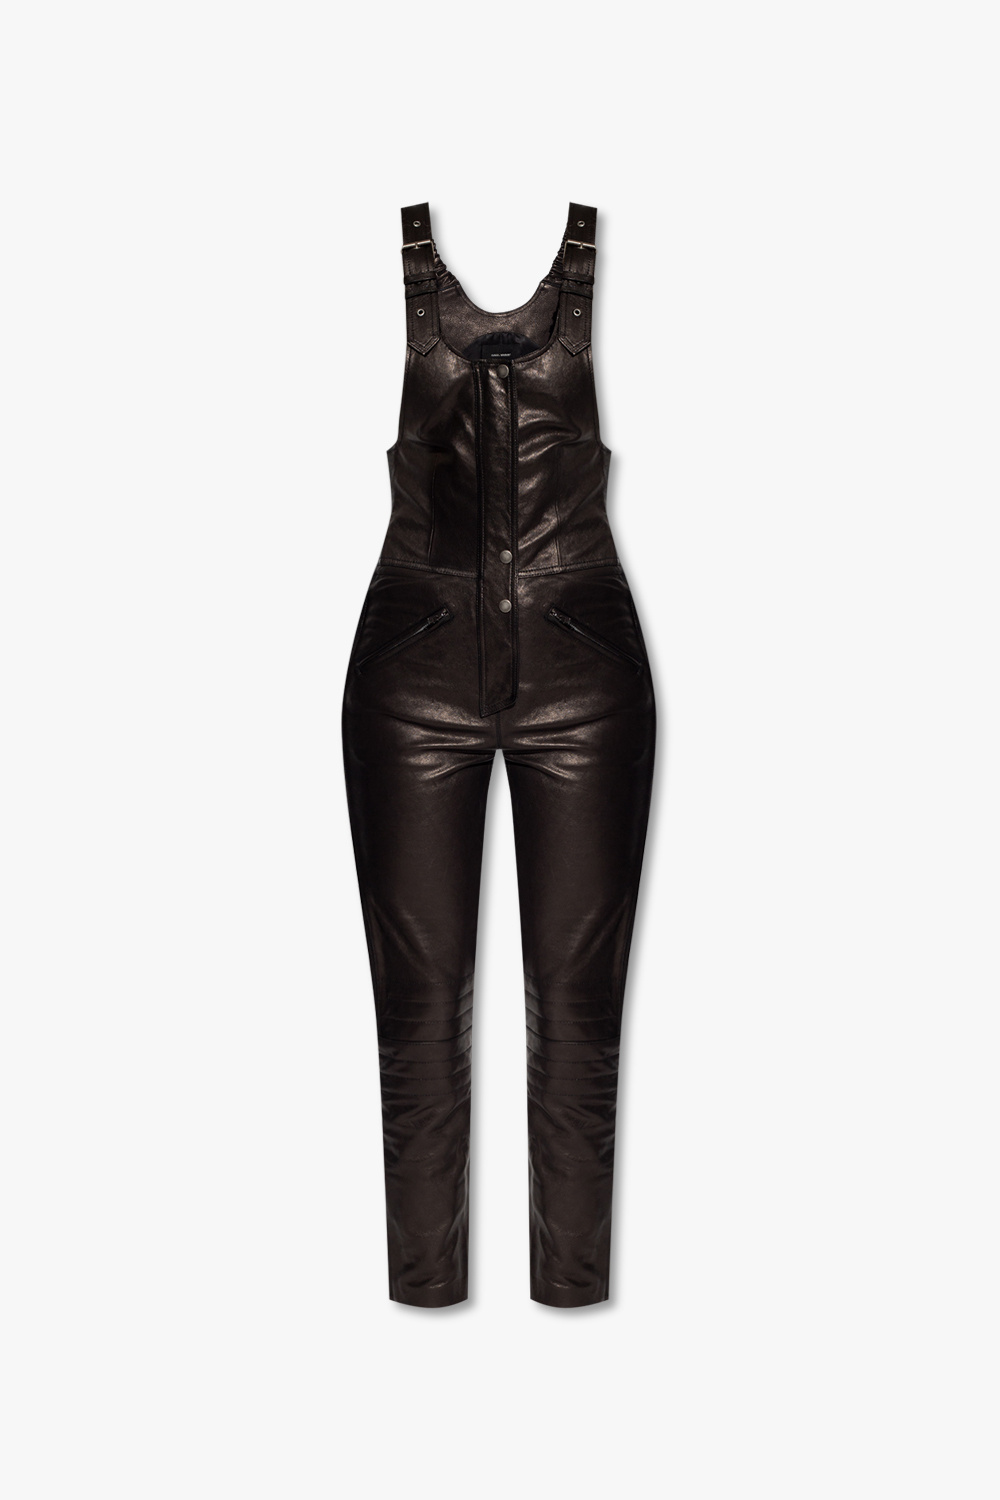 Isabel Marant ‘Apolina’ leather All-Time-Favourite